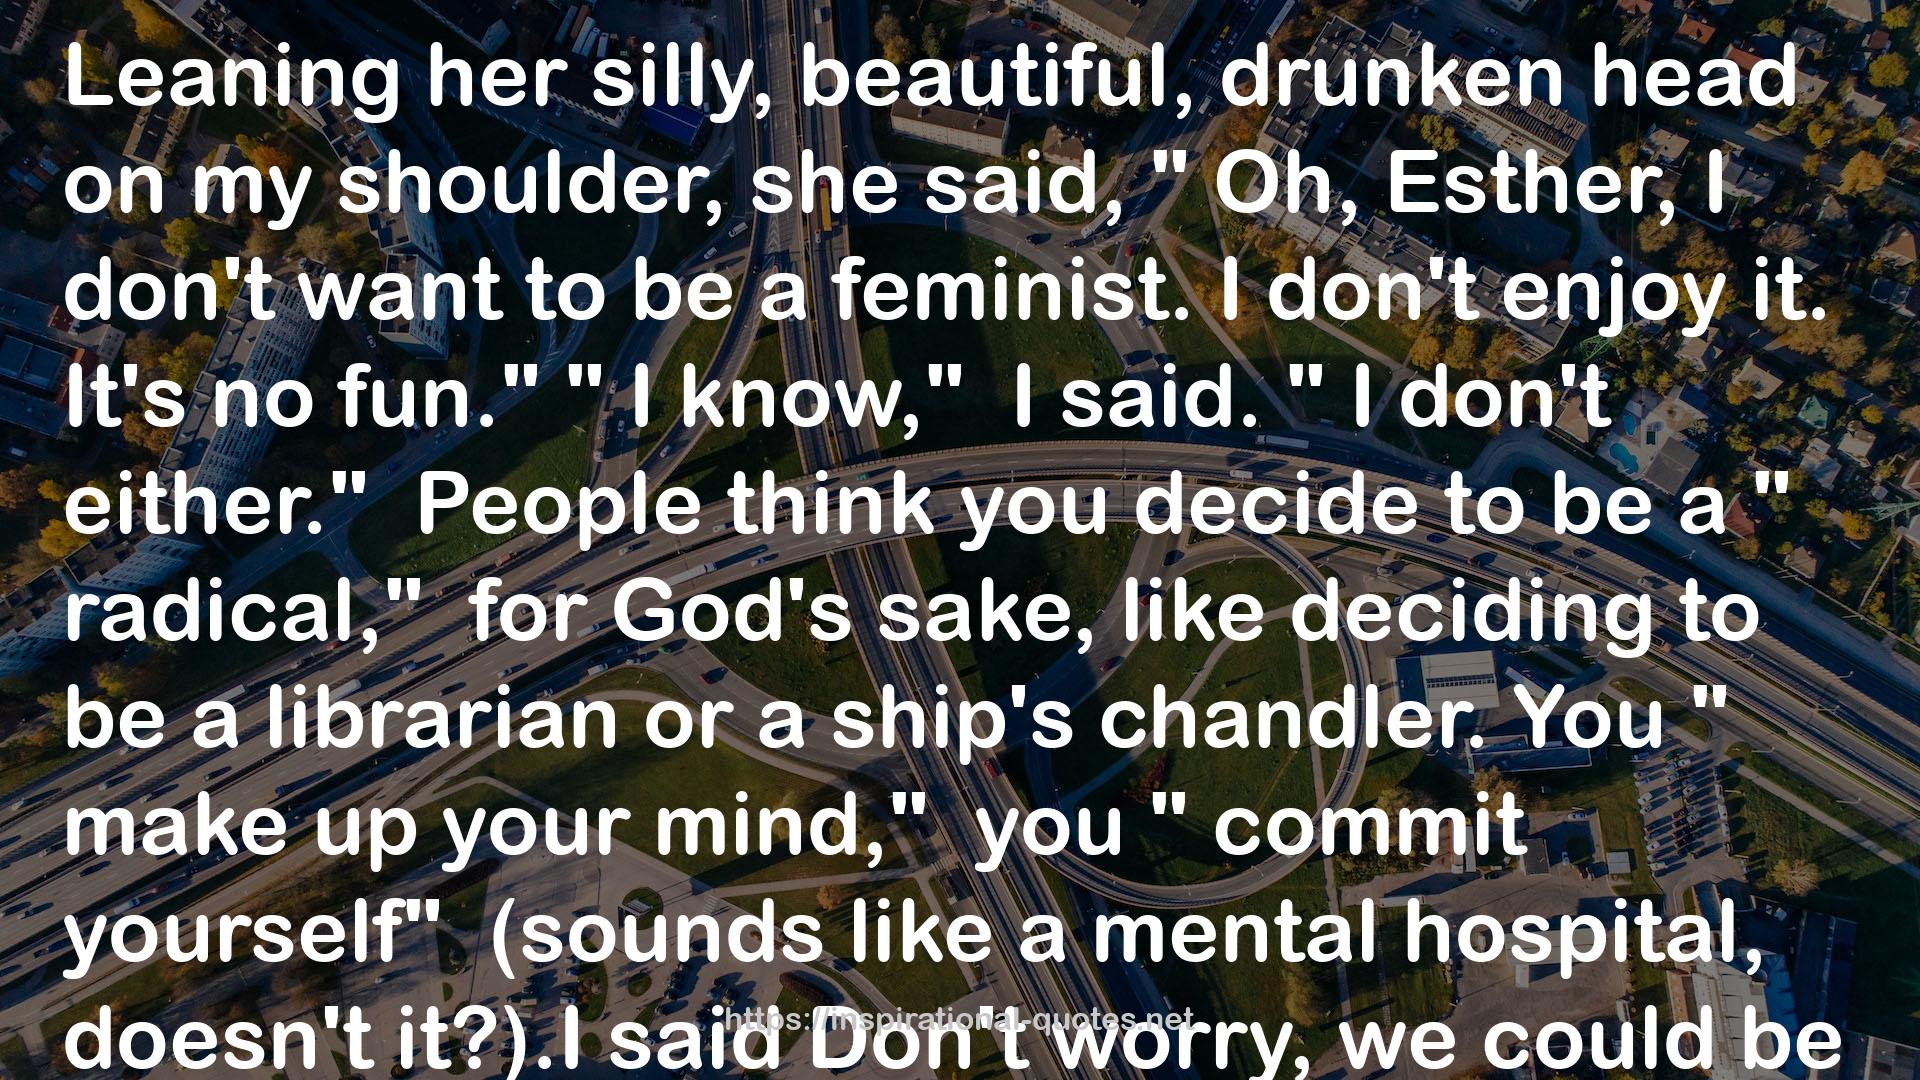 her silly, beautiful, drunken head  QUOTES